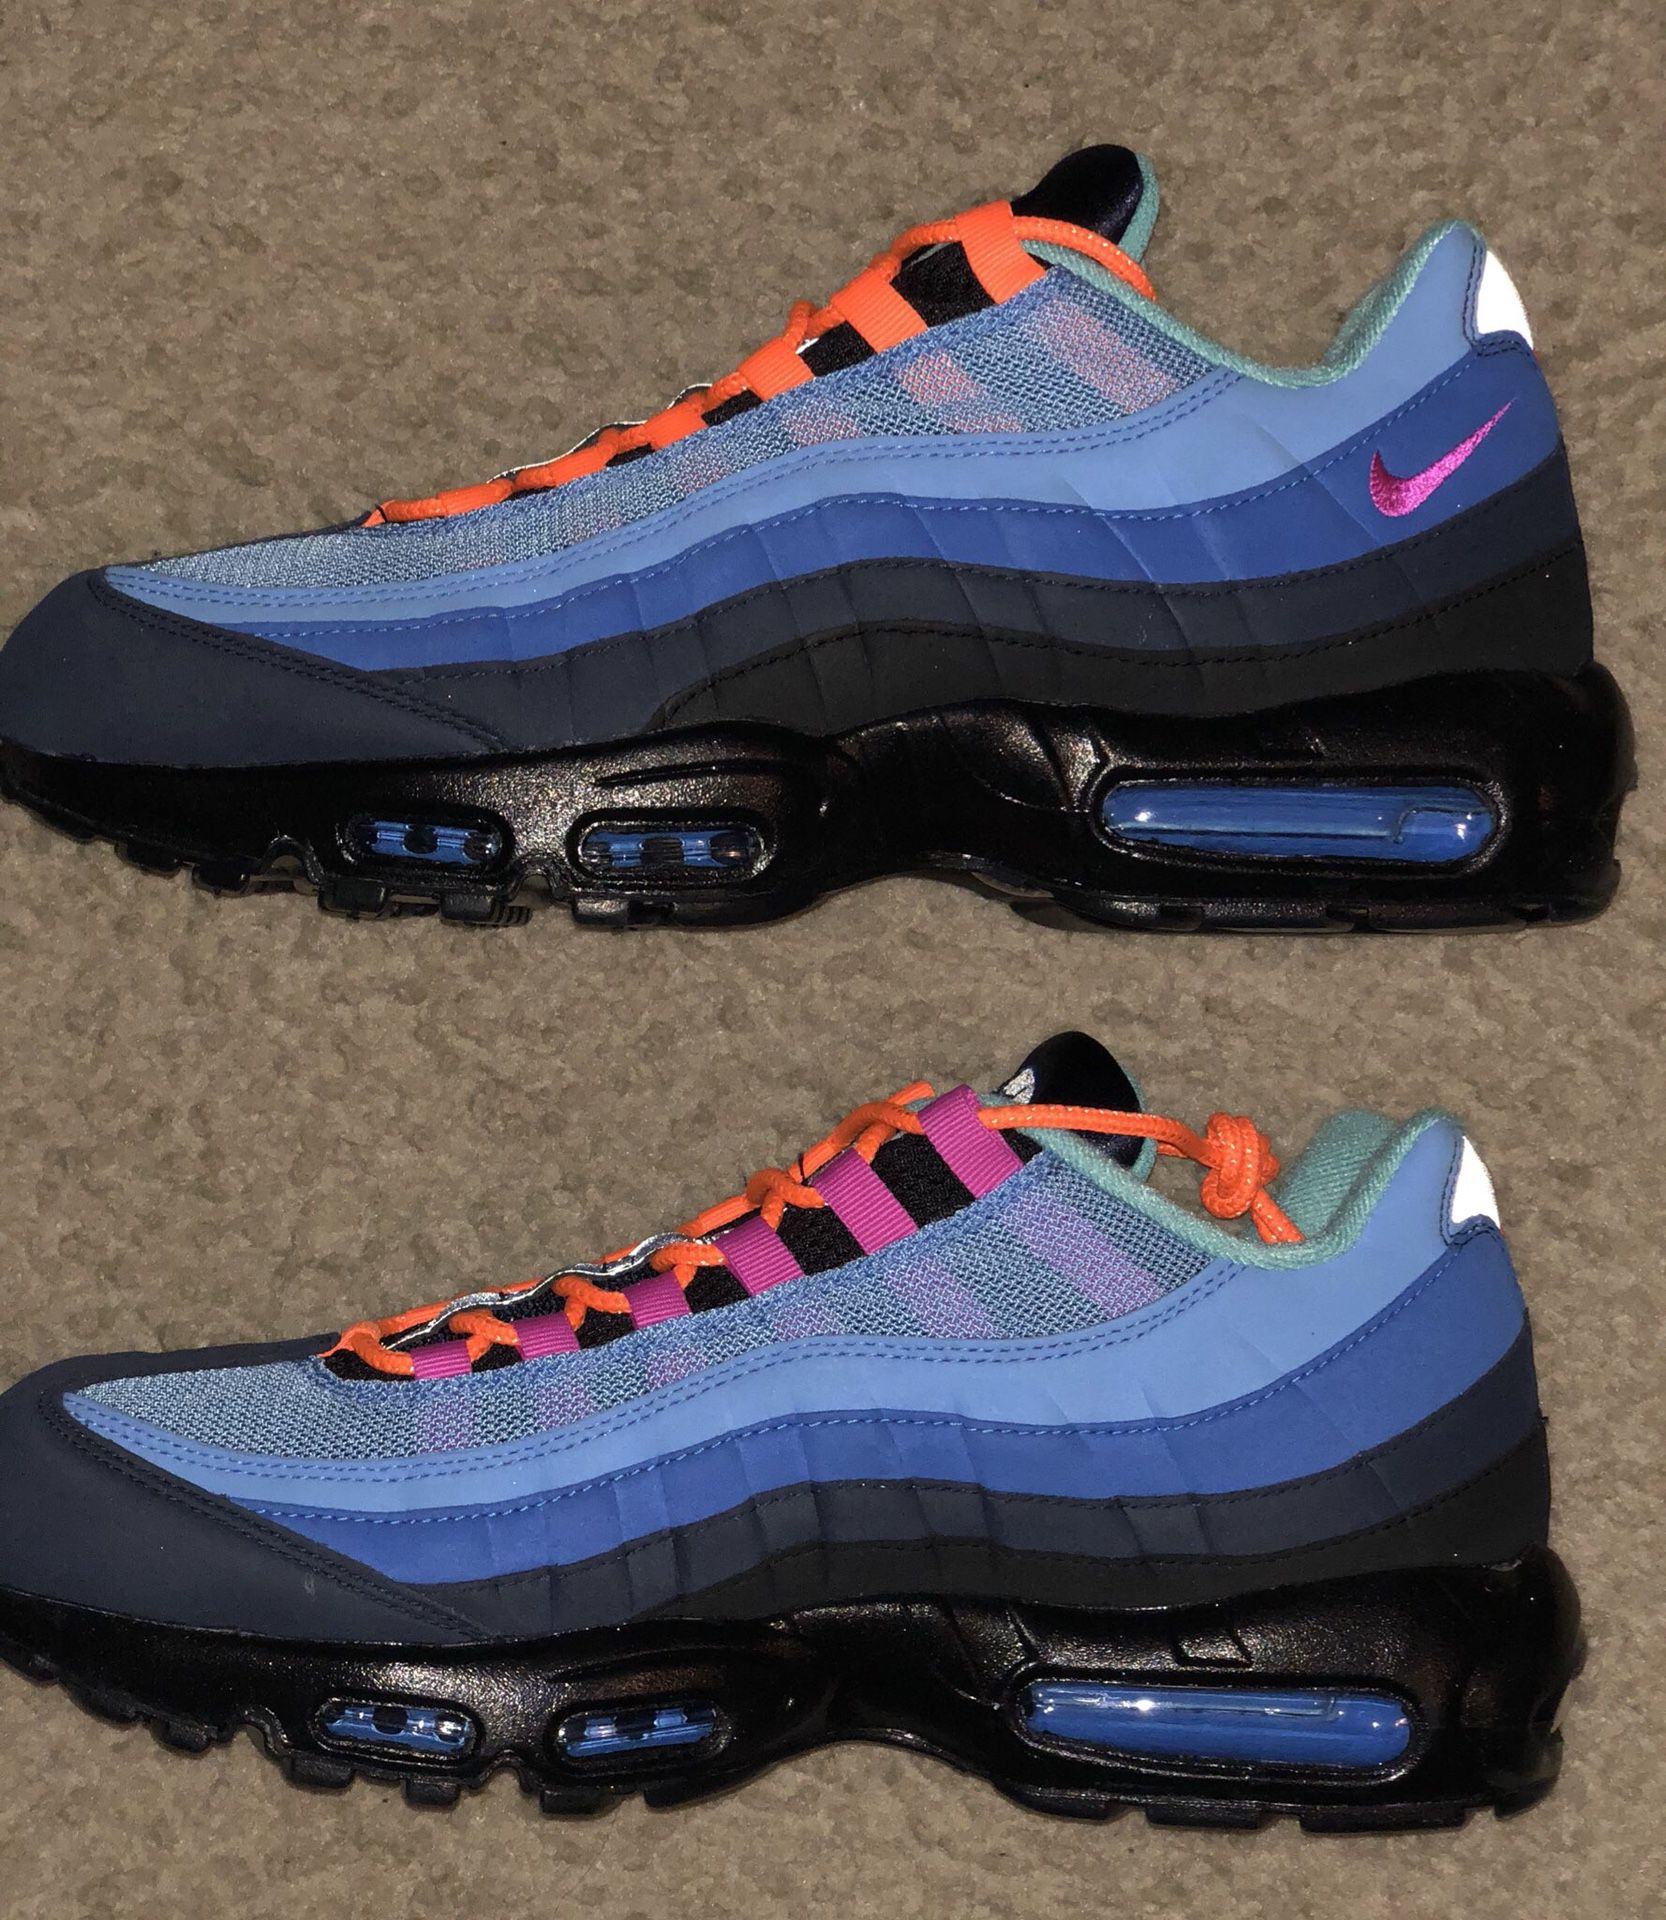 air max 95 coral studios size 12 new only 50 pairs made for Sale in Reisterstown, MD - OfferUp